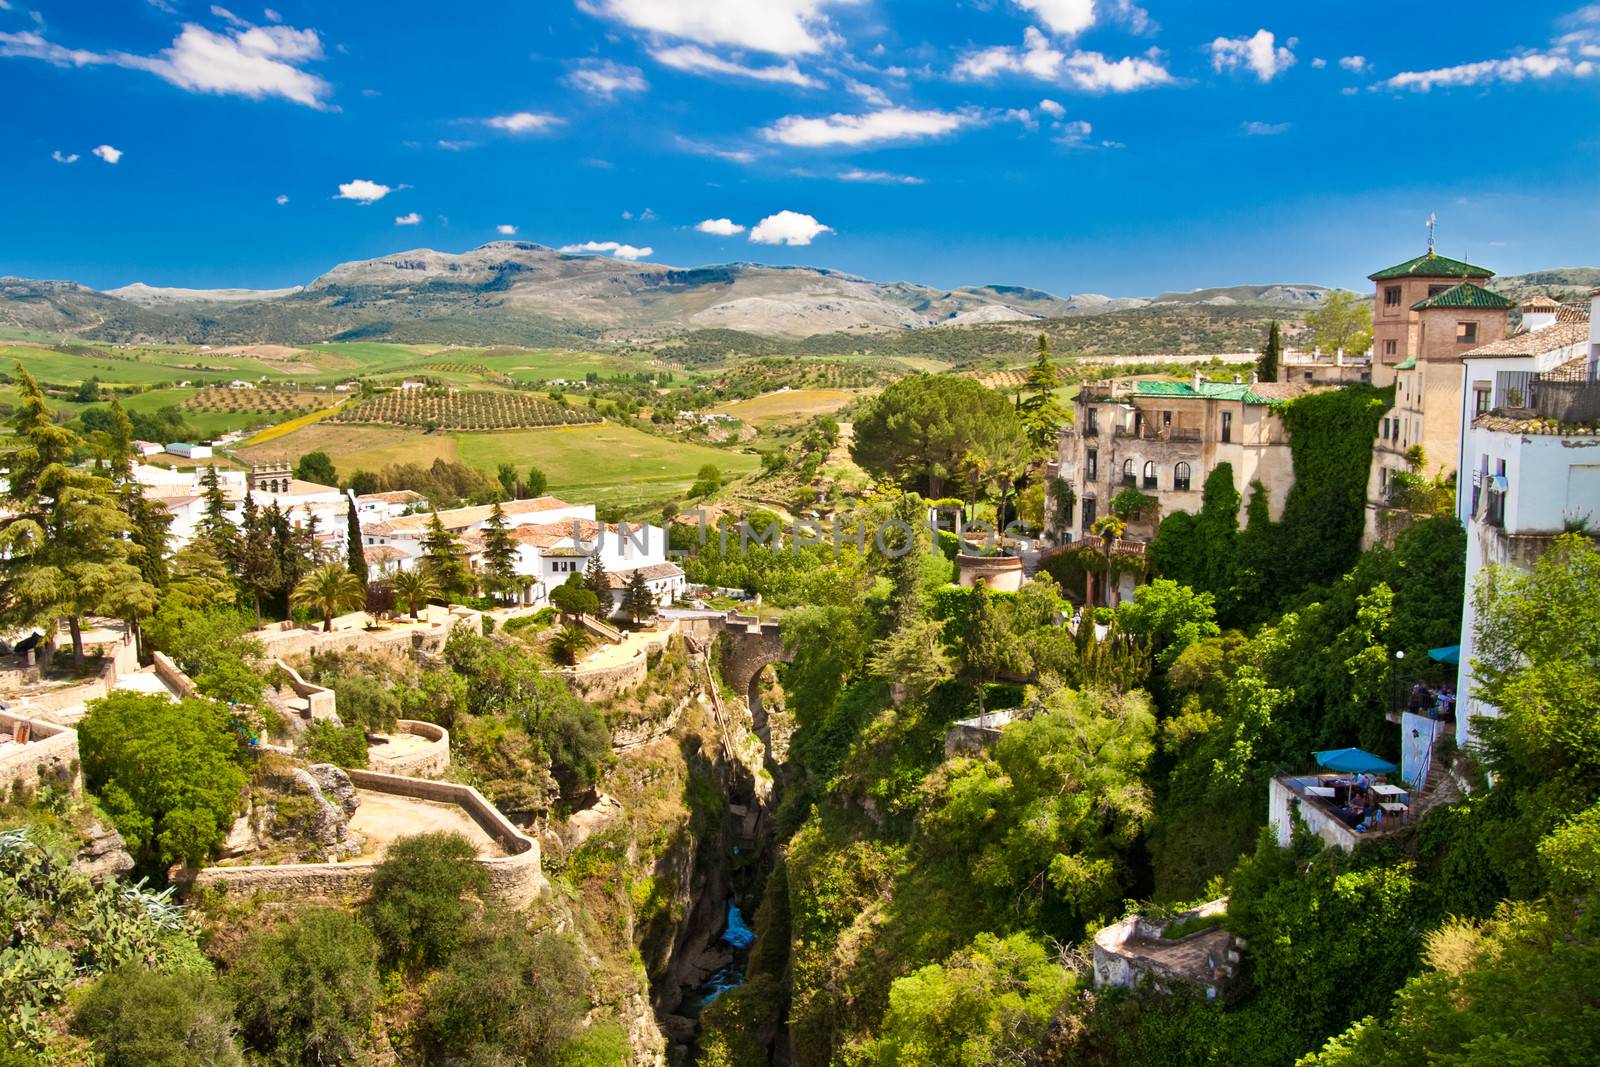 Panoramic view from a new bridge in Ronda, one of the famous white villages in Andalusia, Spain